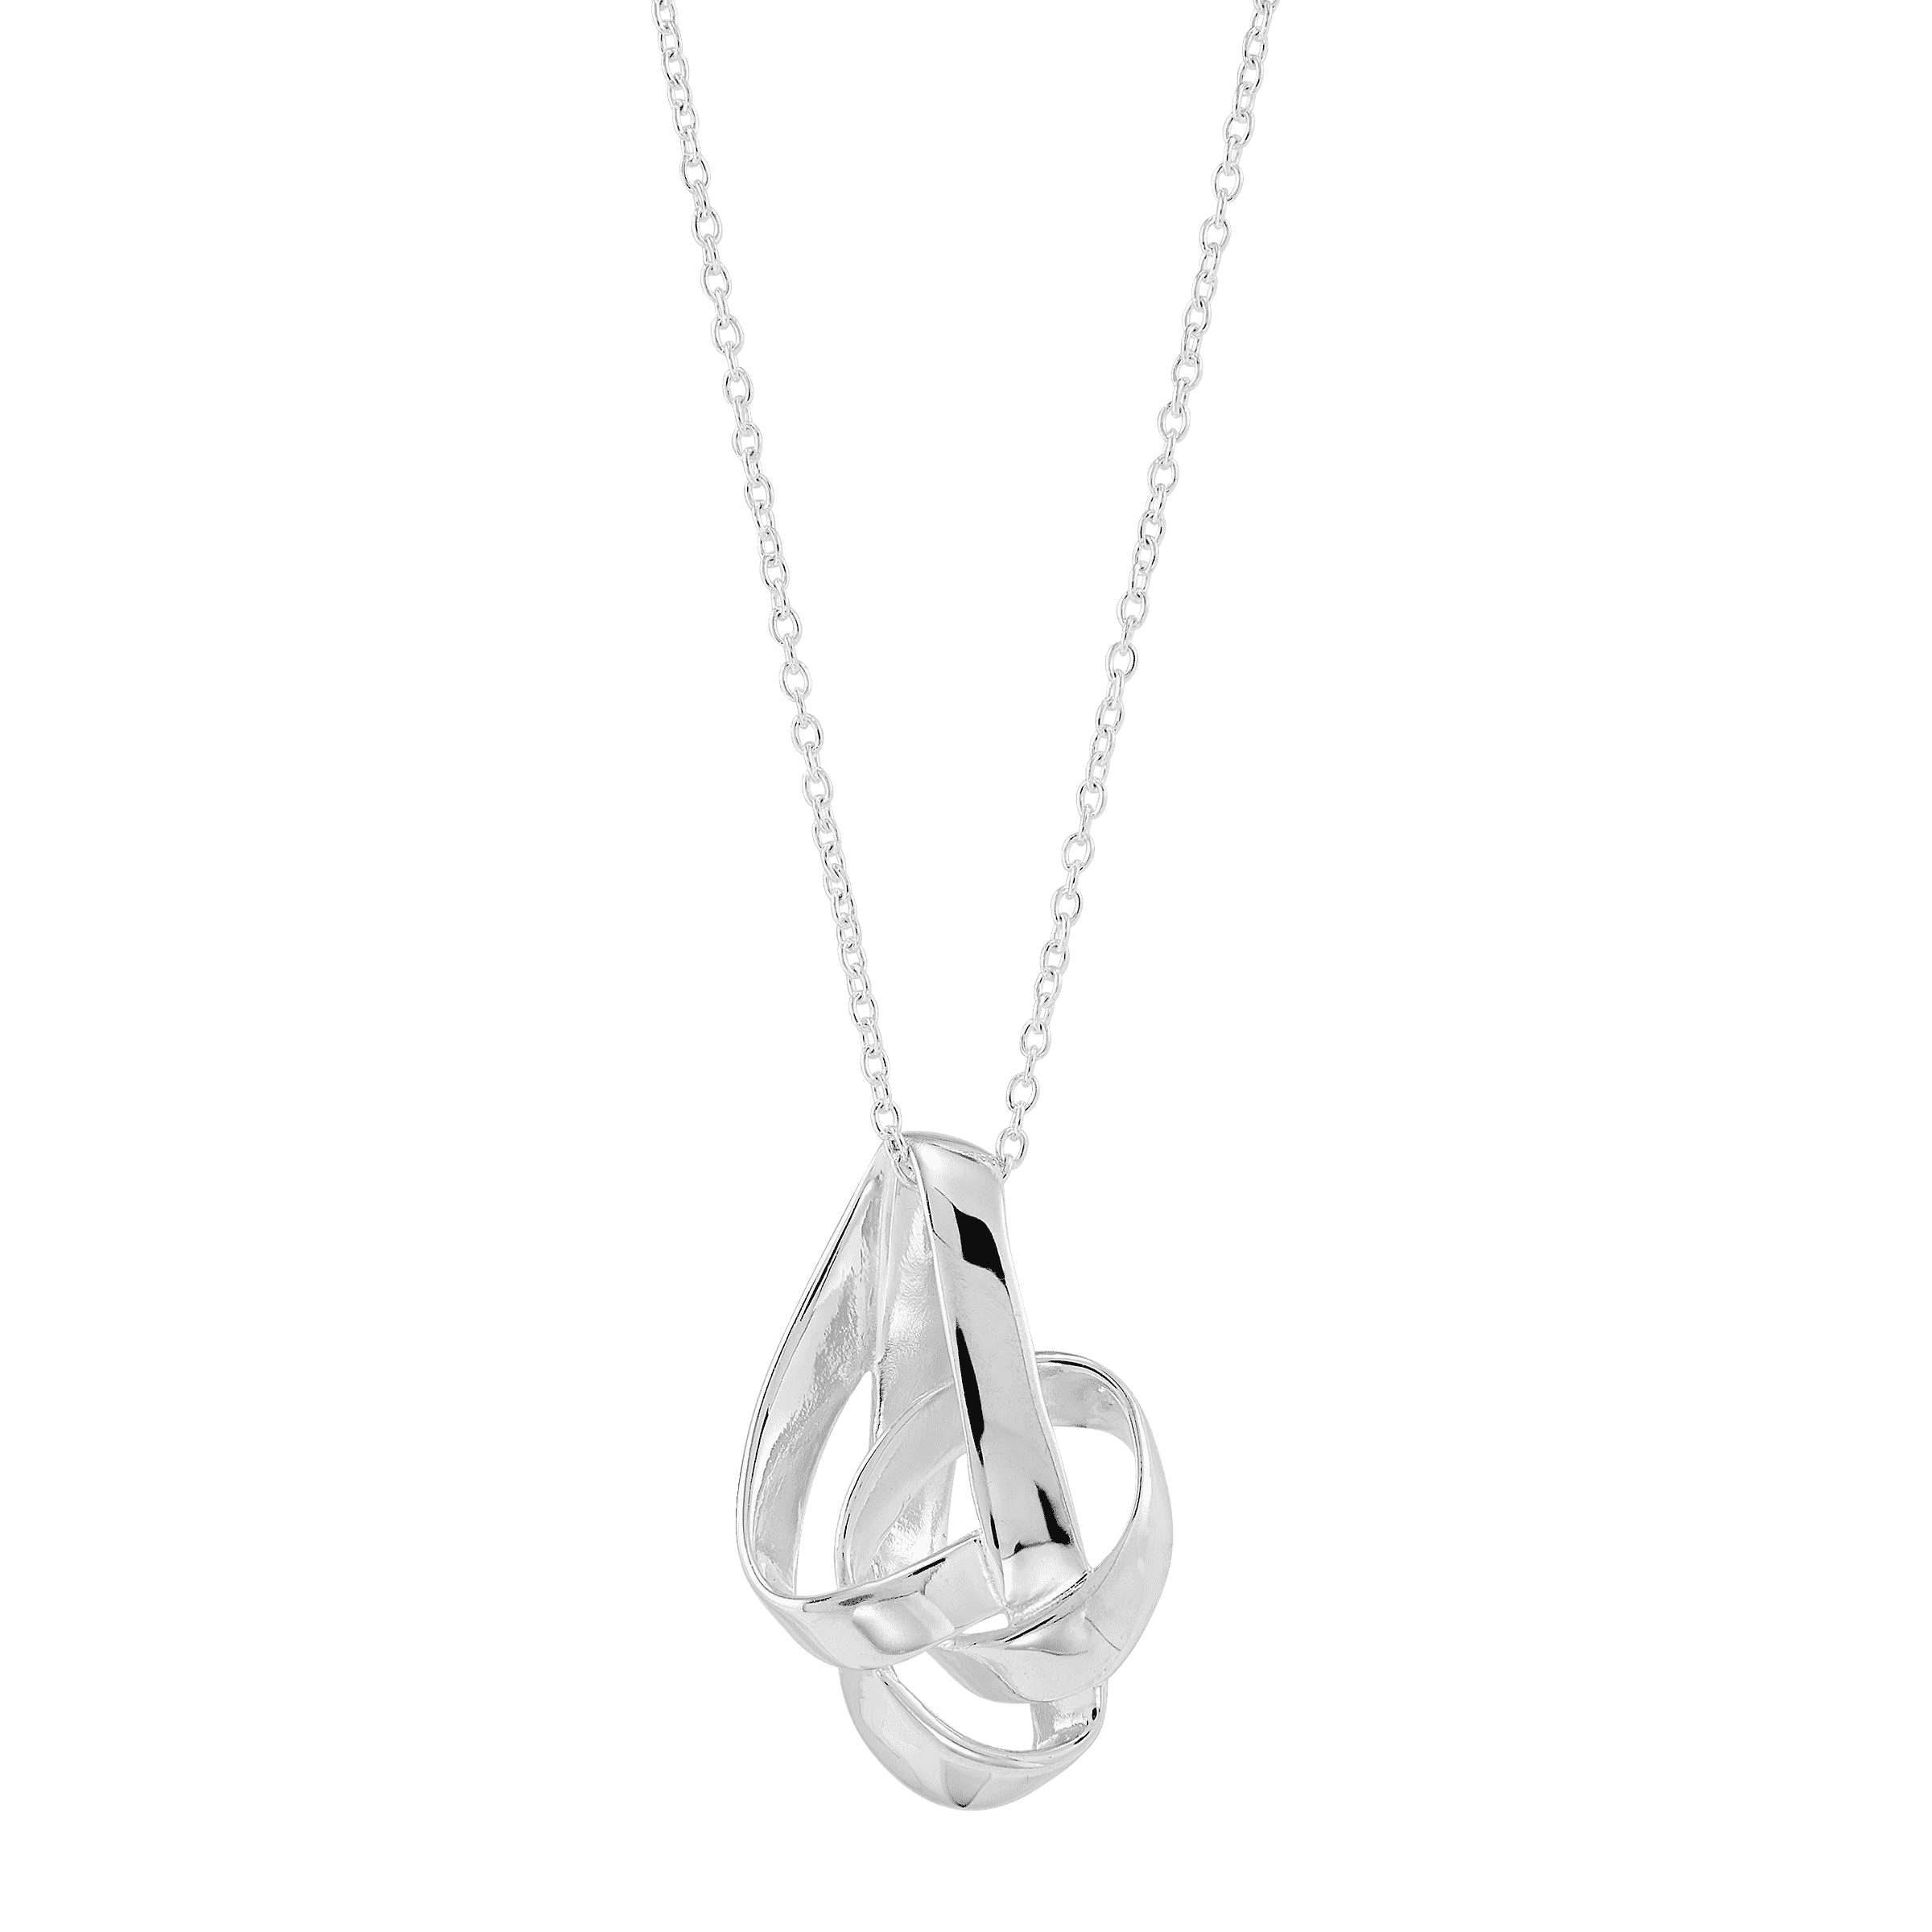 Silpada 'Tied Up' Pendant Necklace in Sterling Silver, 16